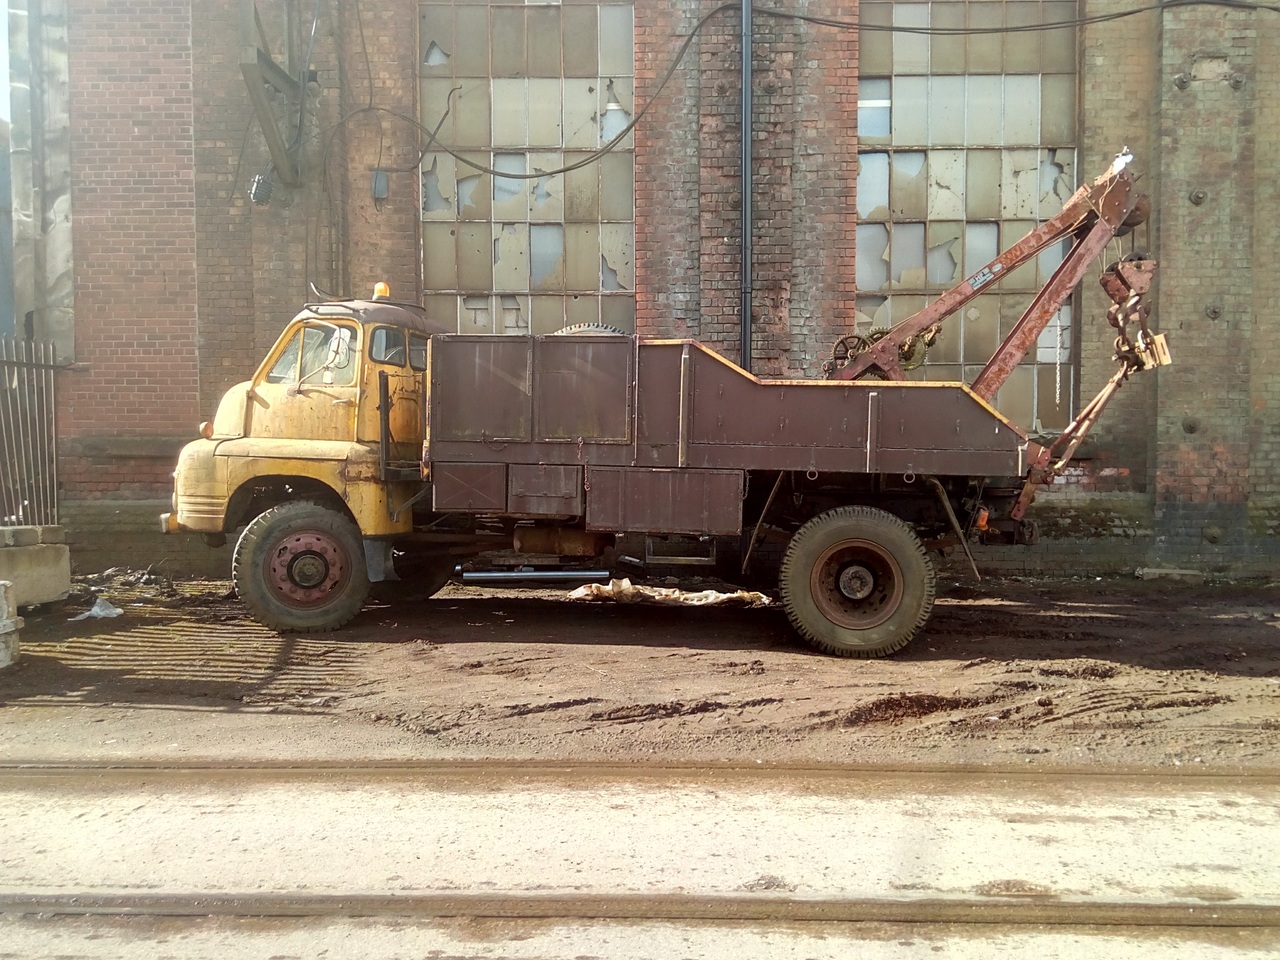 A Bedford RL truck parked in front of a very dilapidated
industrial building with most of the windows smashed out and boarded
from the inside. The truck has a faded yellow cab, and the body is
painted a dark chocolate brown.